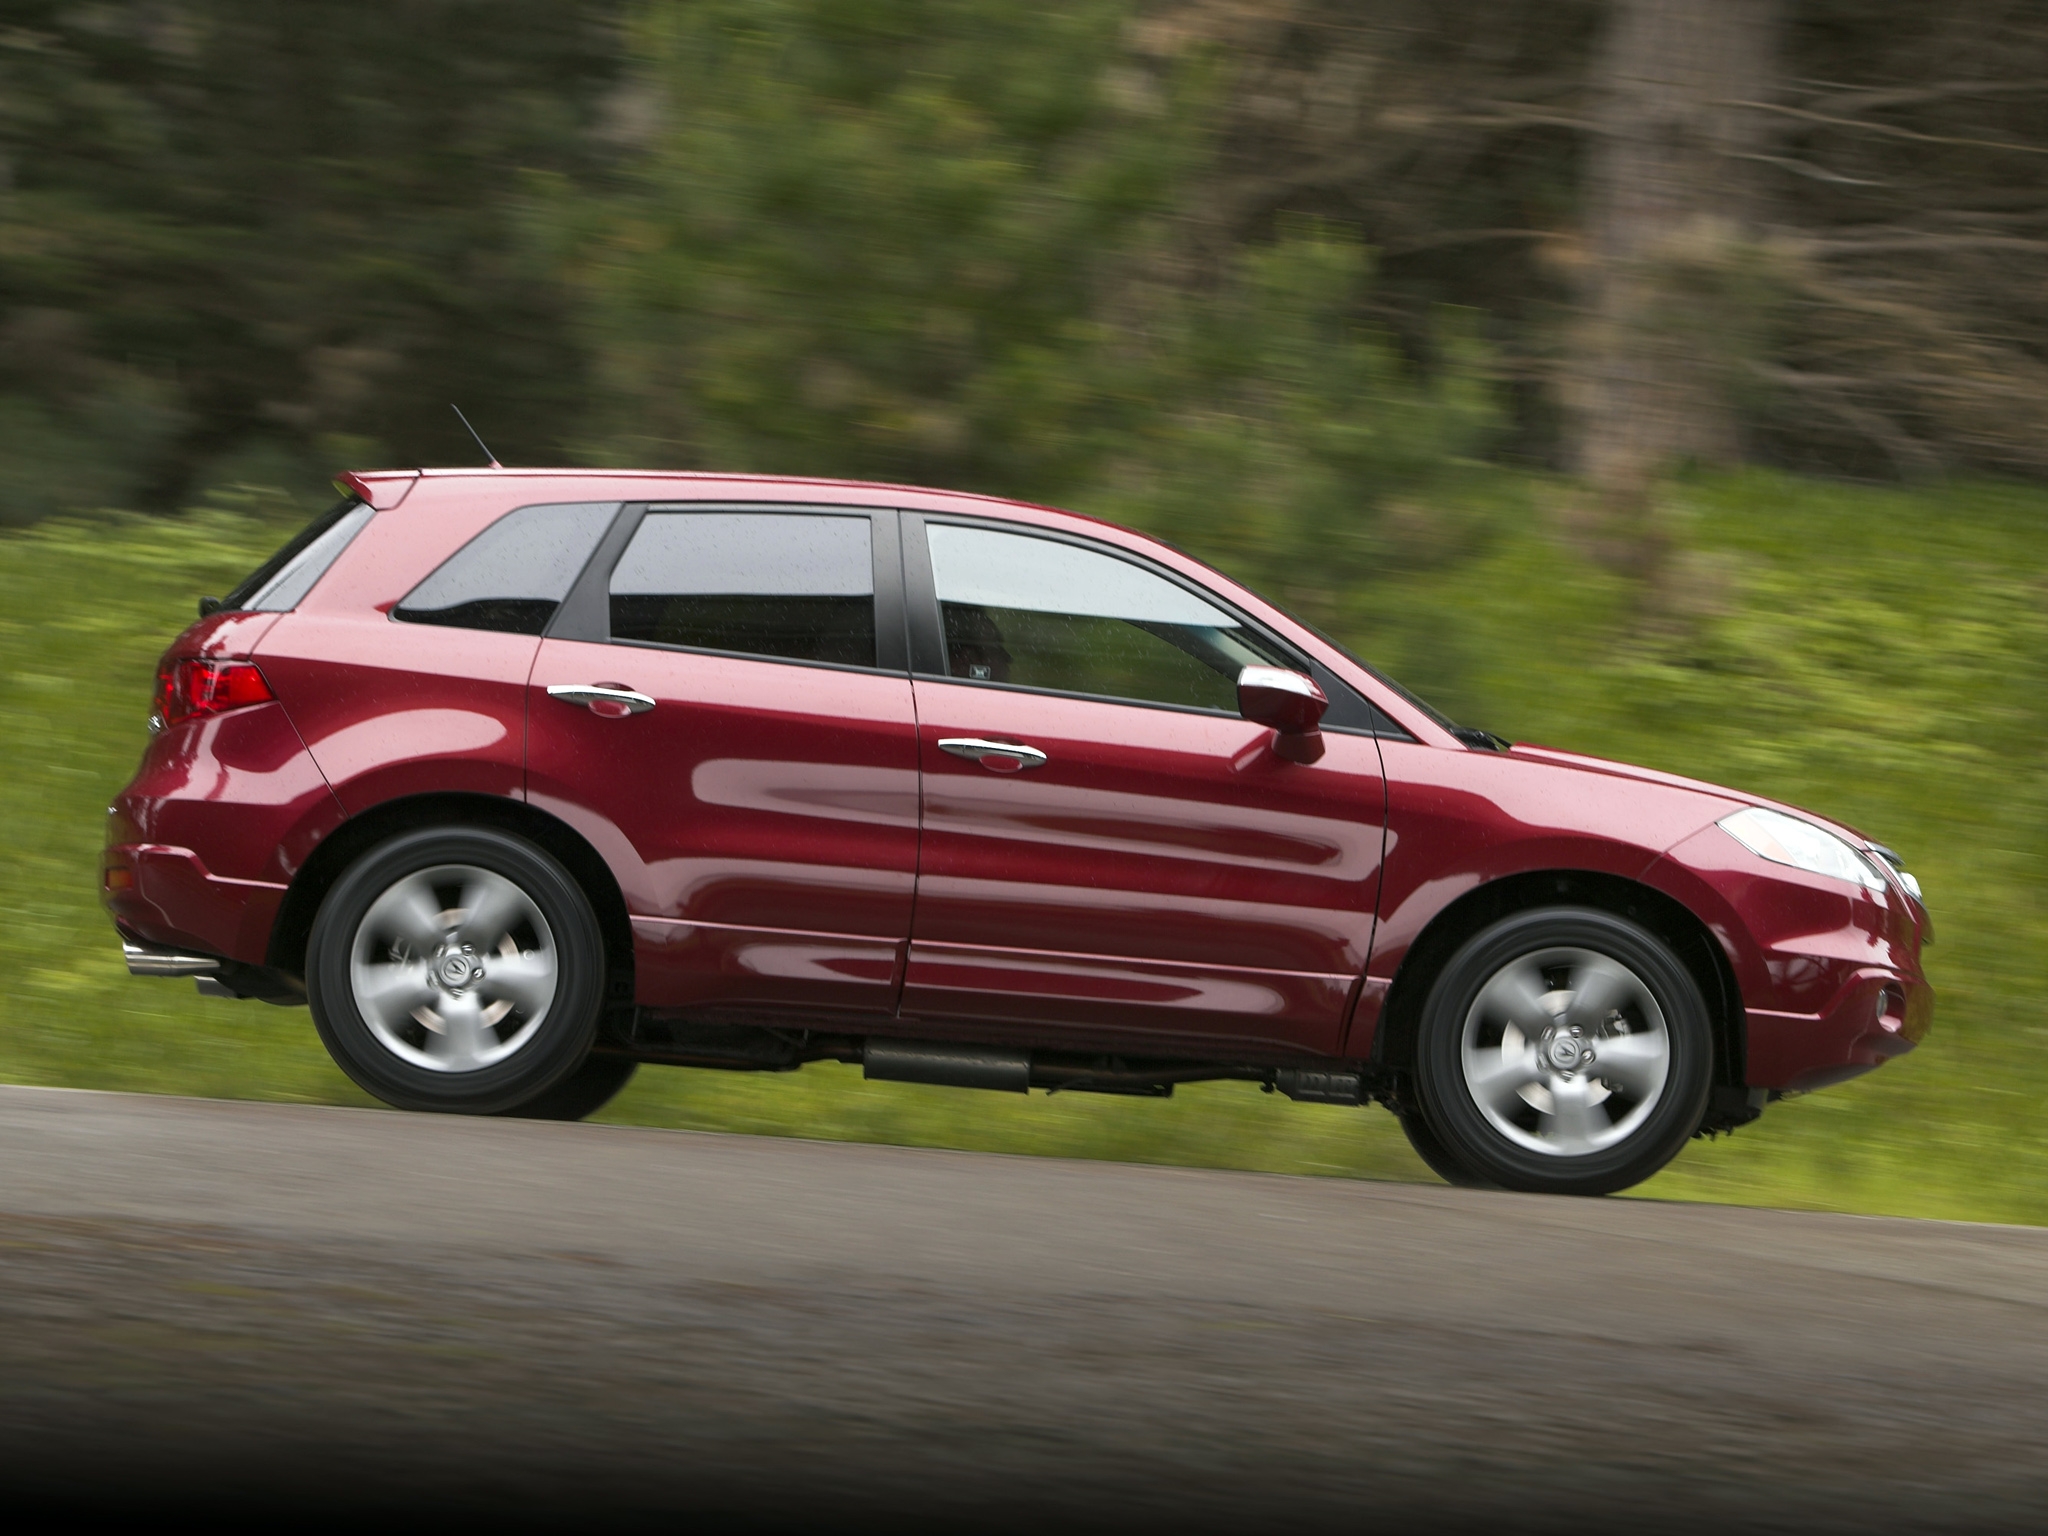 speed, auto, nature, acura, cars, red, jeep, side view, akura, rdx High Definition image